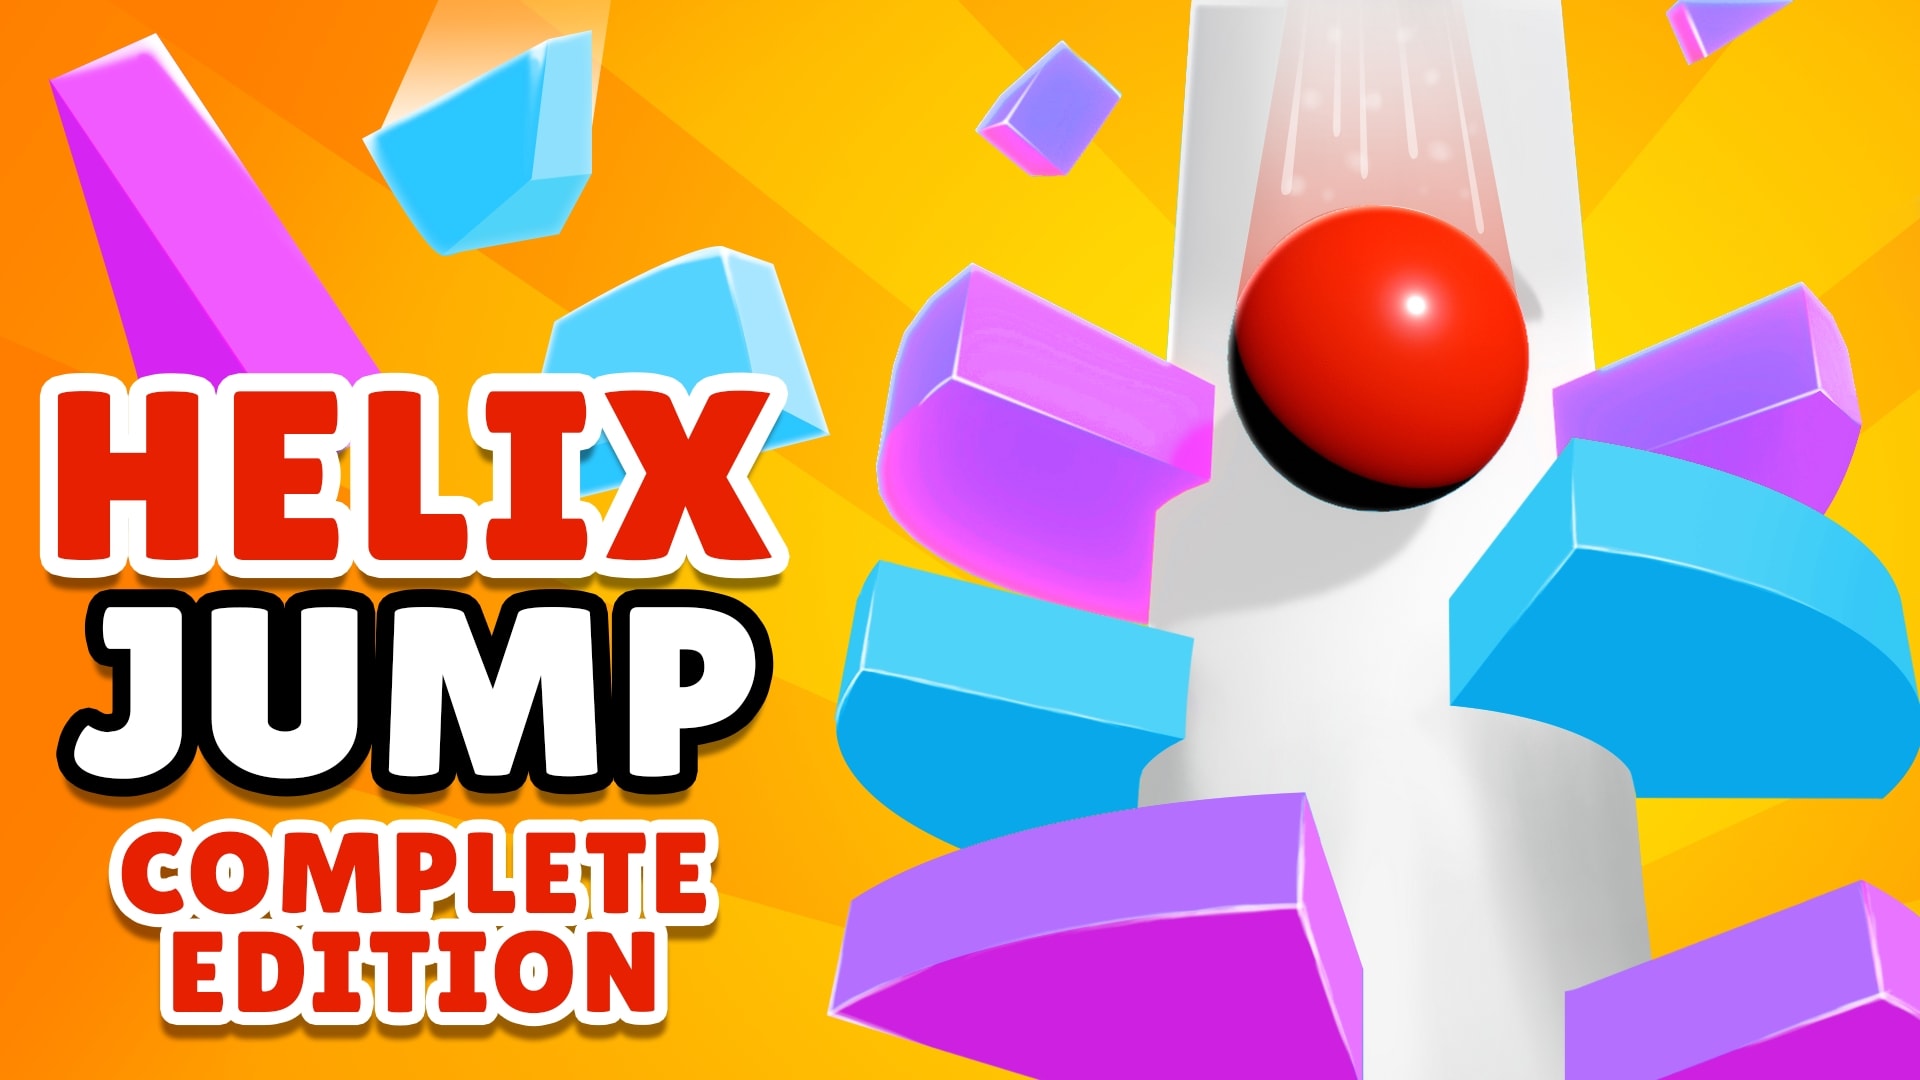 Helix Jump: Complete Edition